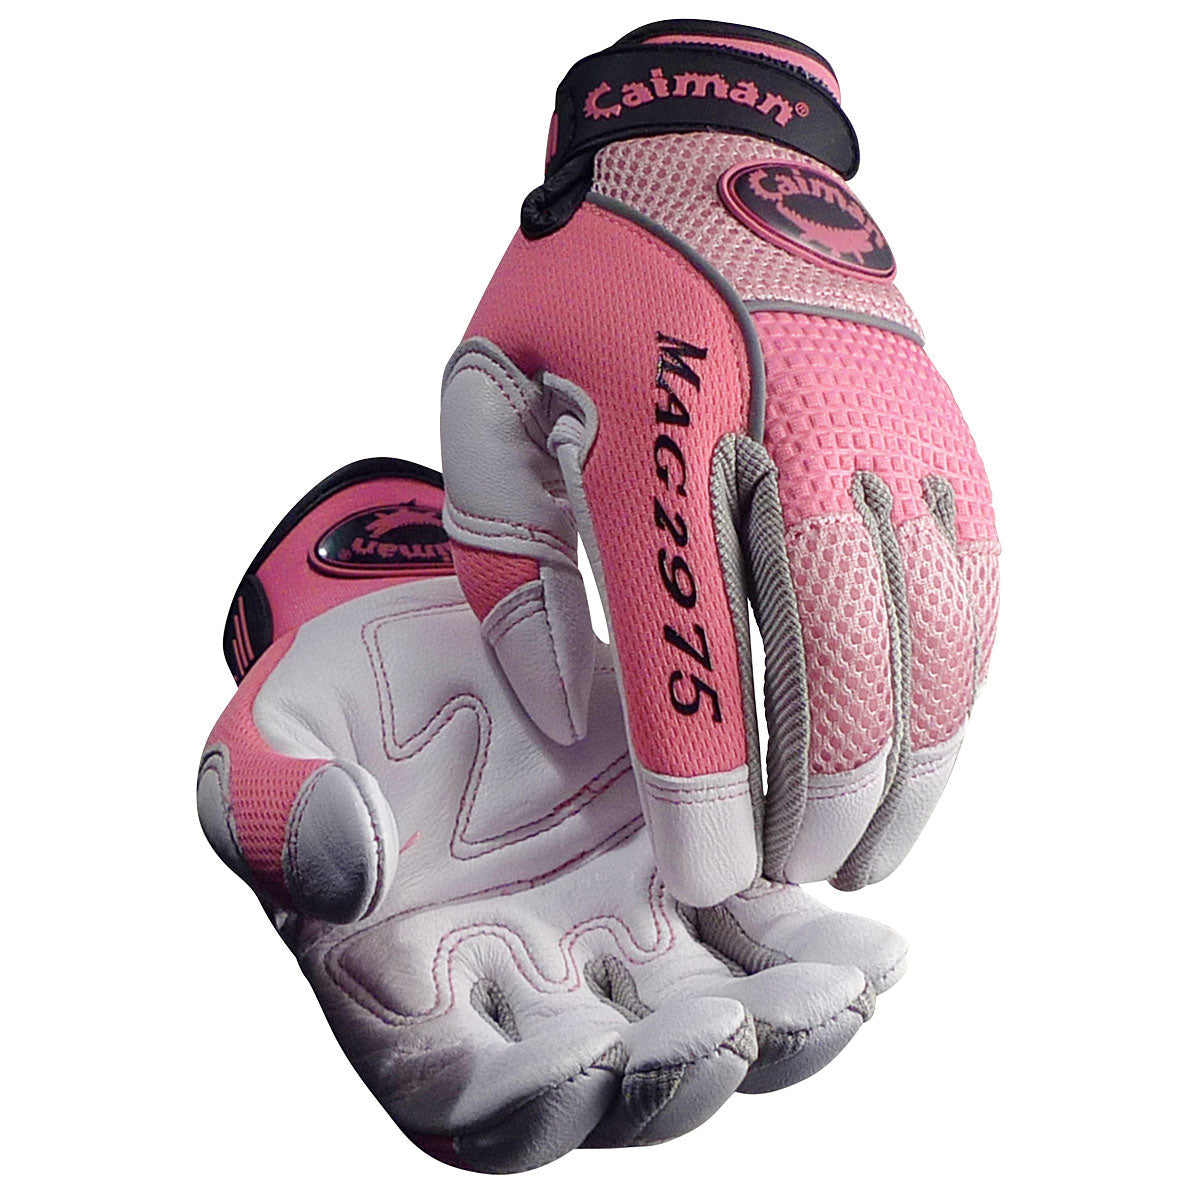 Multi-Activity Glove with Goat Grain Leather Padded Palm and AirMesh™ Back - Ladies Multi-Color